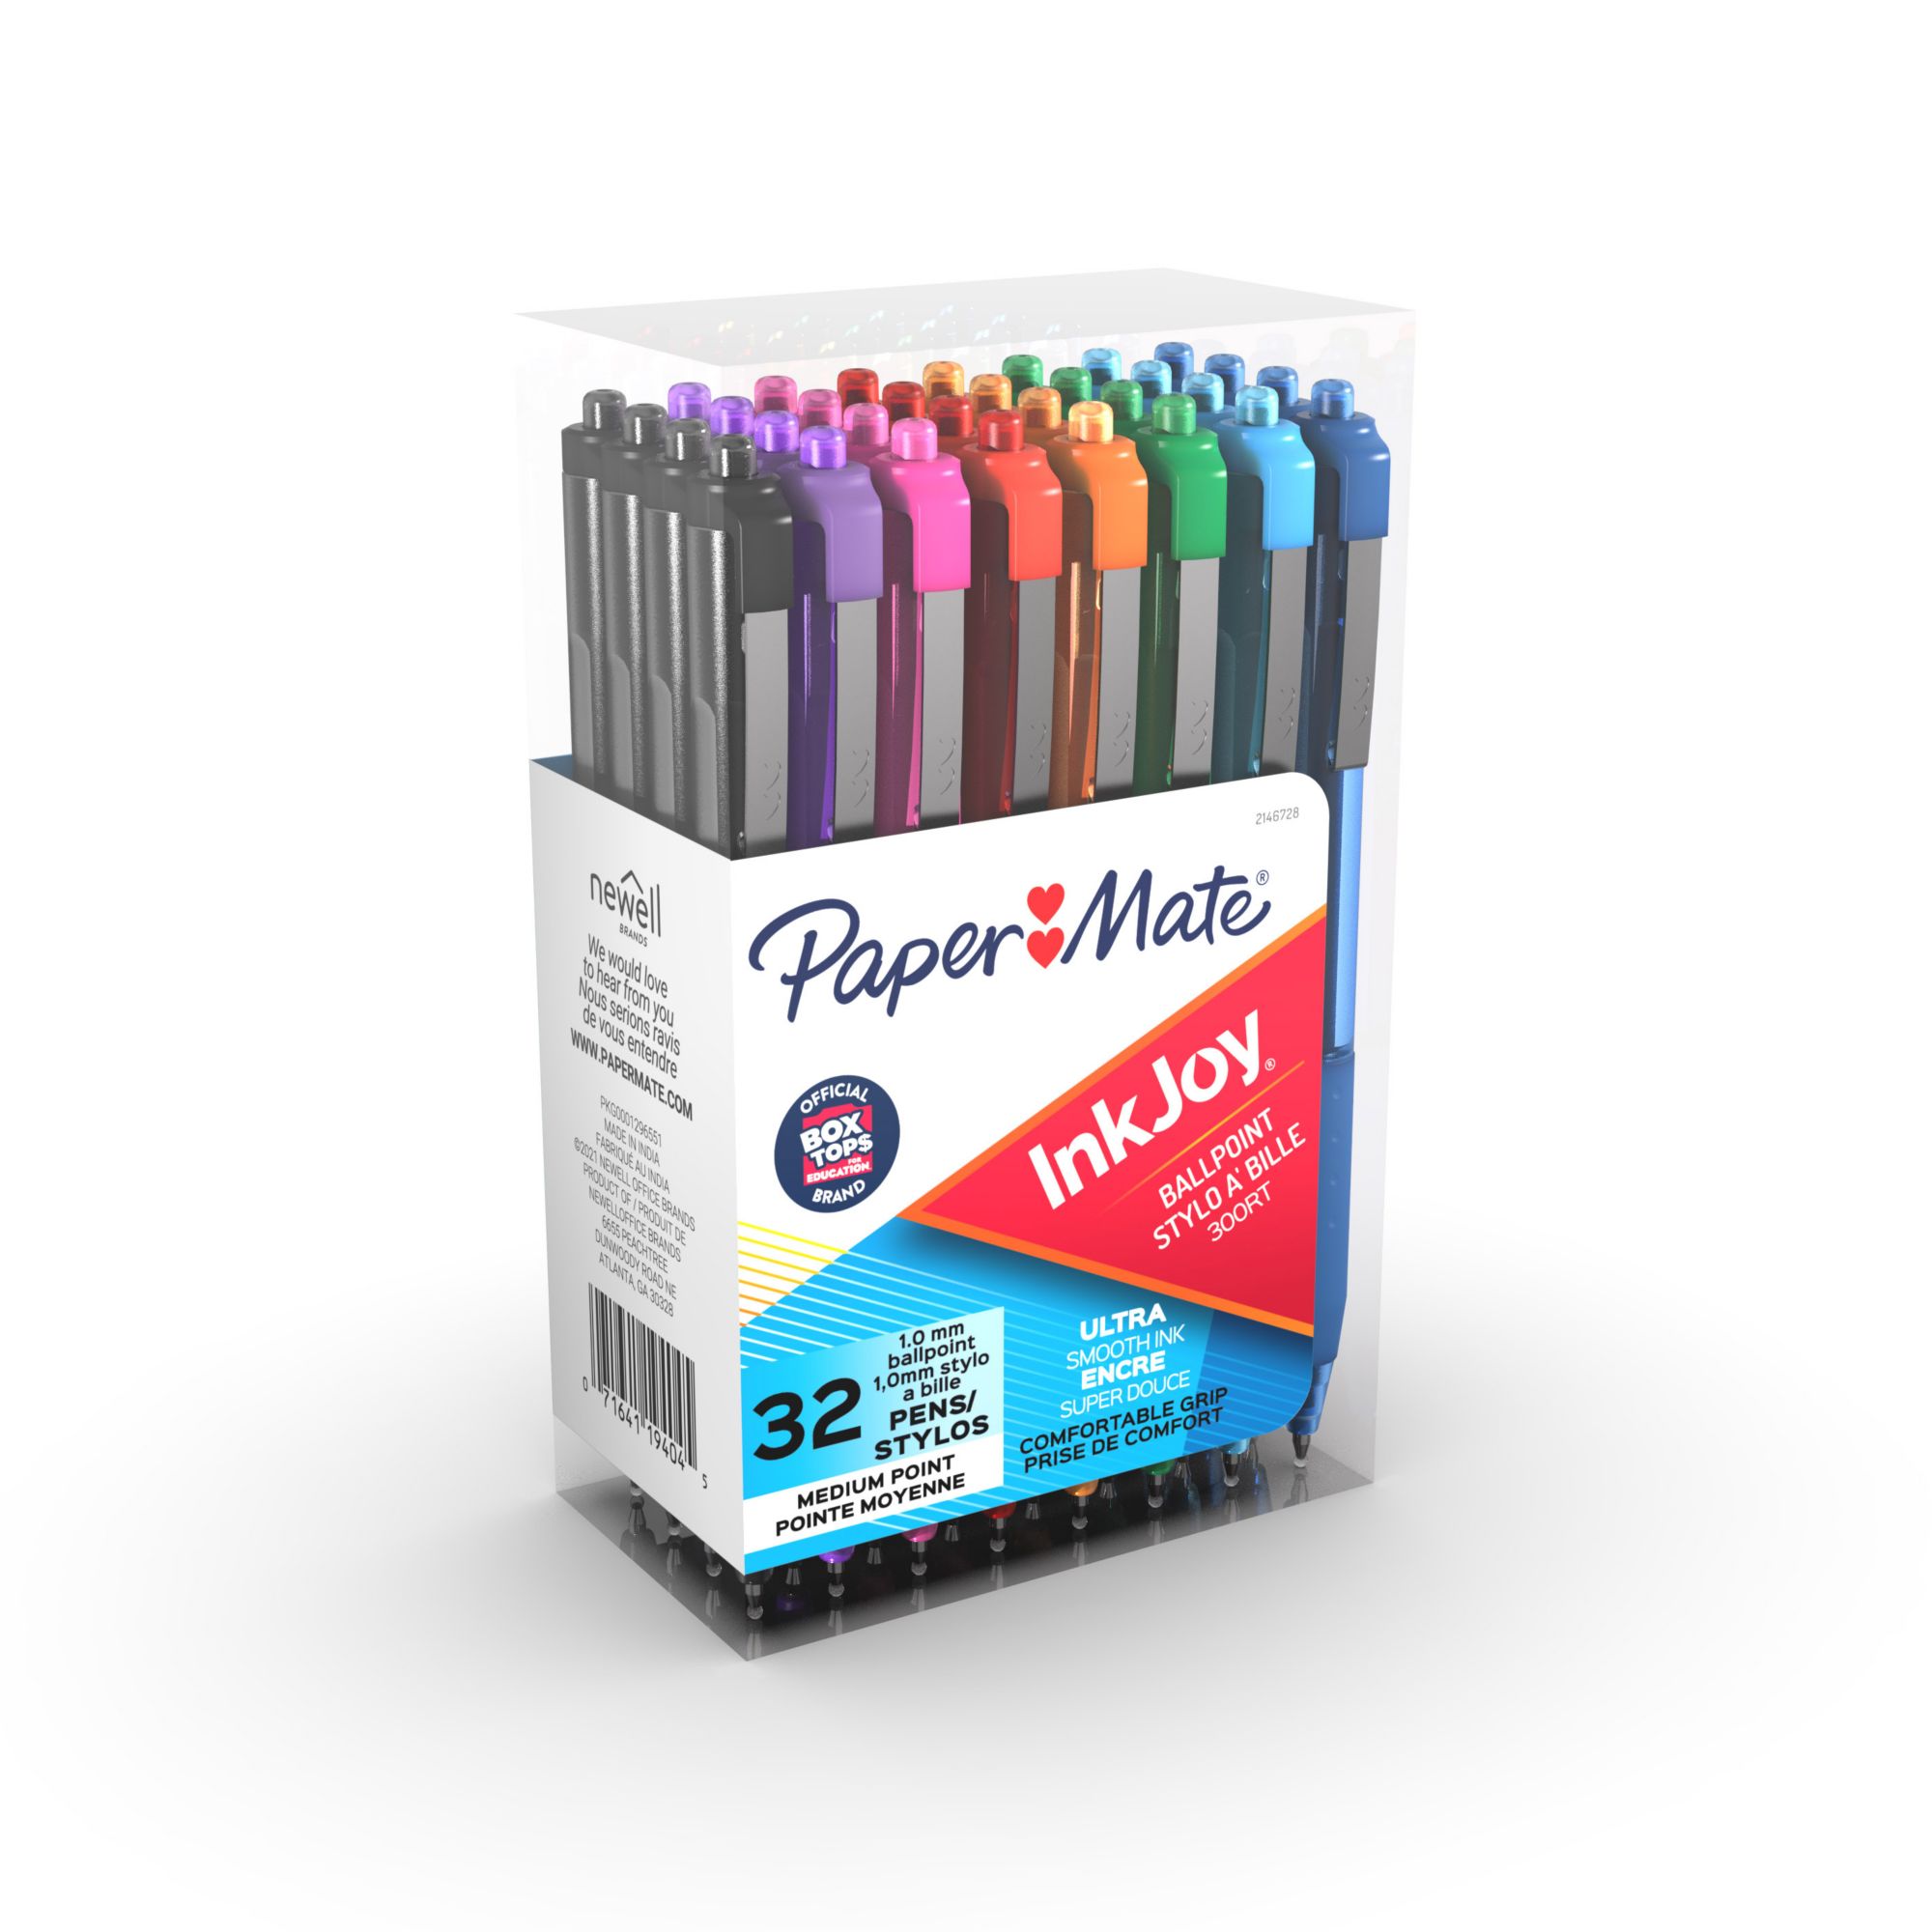 Sharpie Accent Tank Highlighters, 24 ct